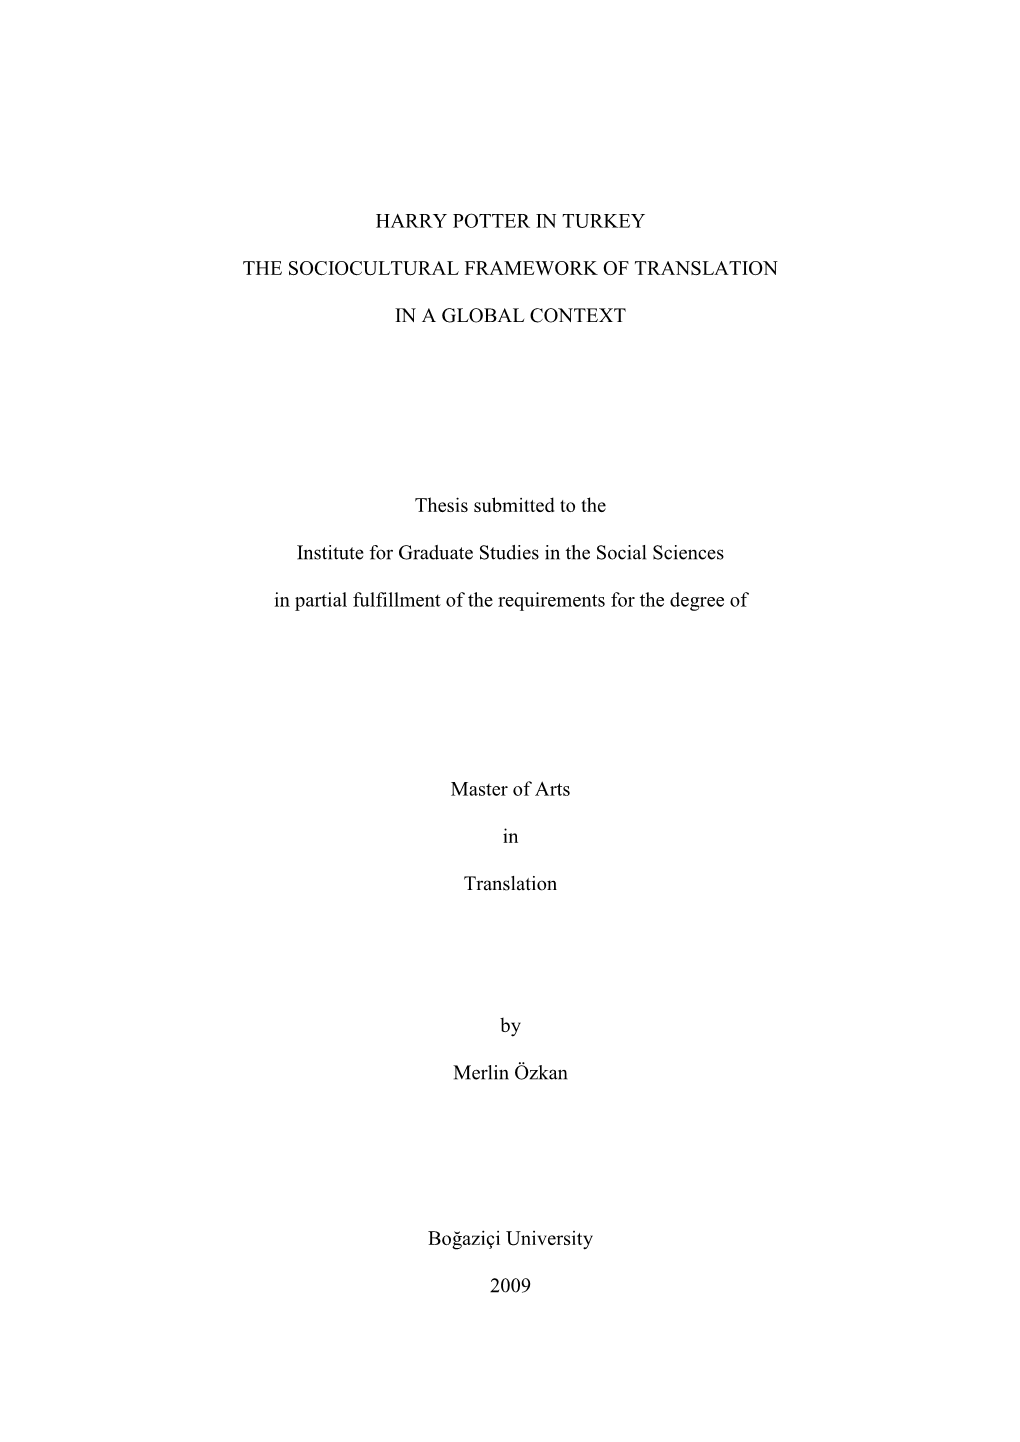 HARRY POTTER in TURKEY the SOCIOCULTURAL FRAMEWORK of TRANSLATION in a GLOBAL CONTEXT Thesis Submitted to the Institute For